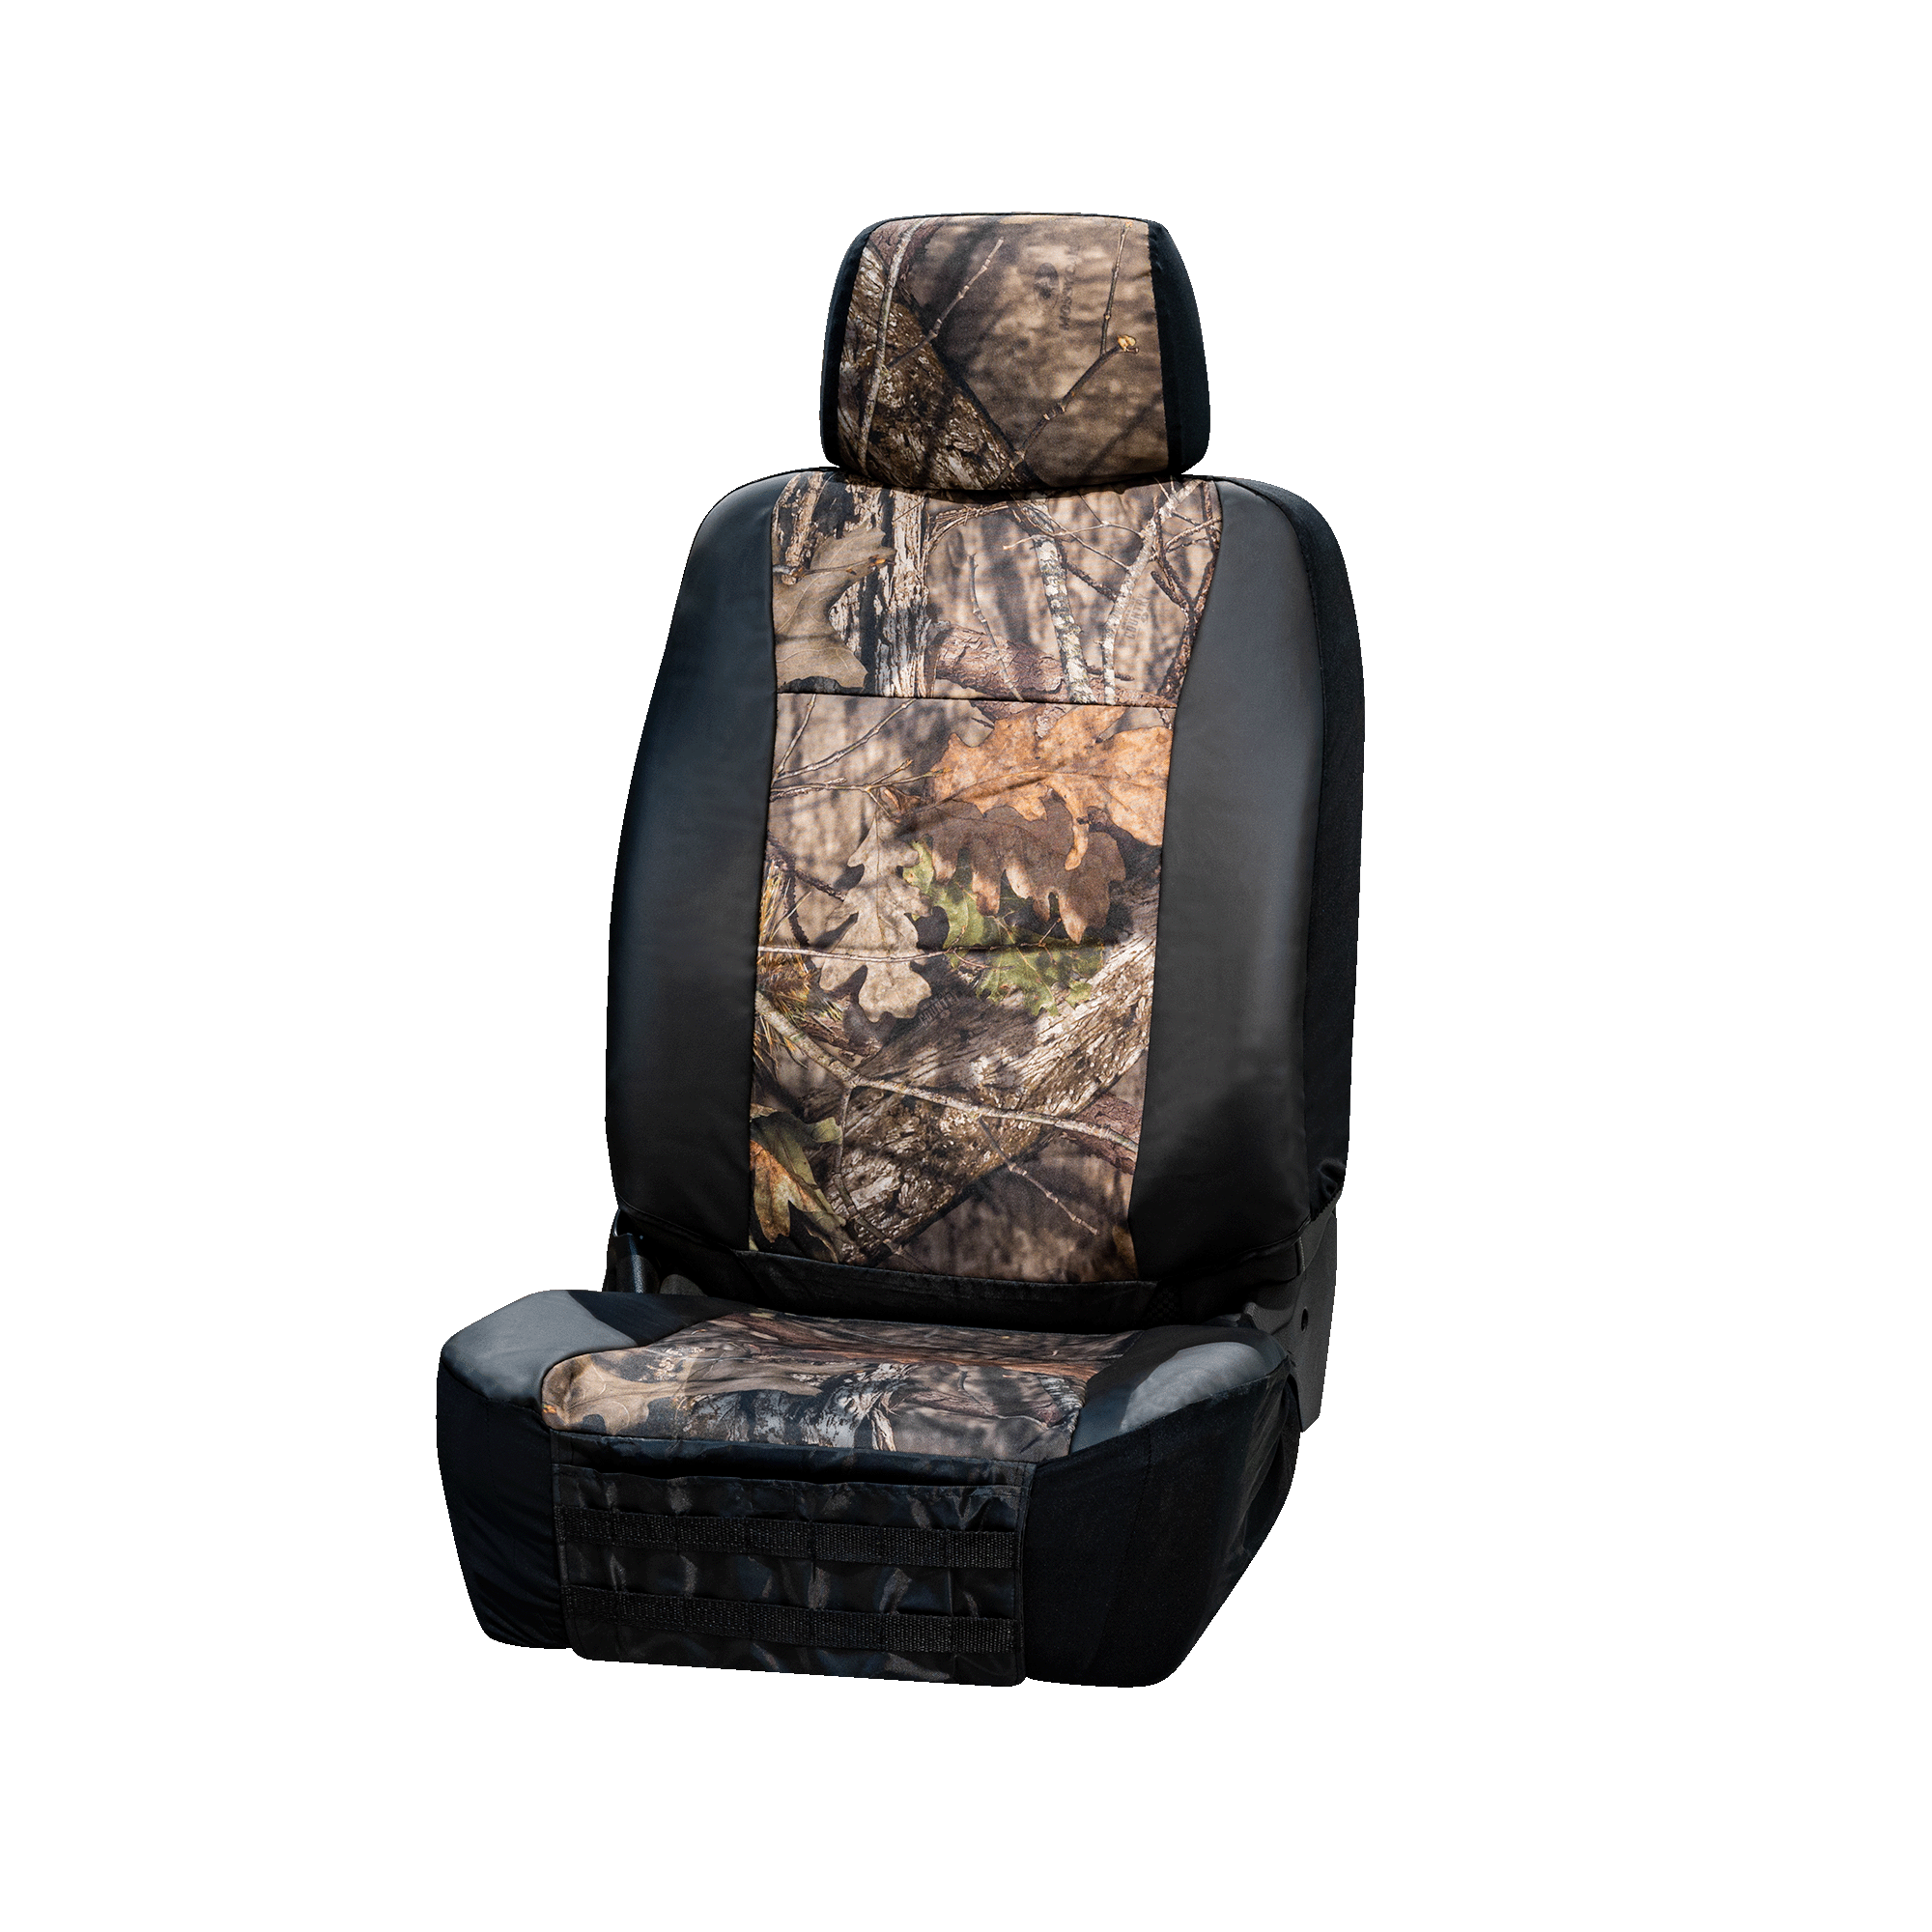 Mossy Oak Truck Seat Covers, Fits Full-Size Truck/SUV Front Seats